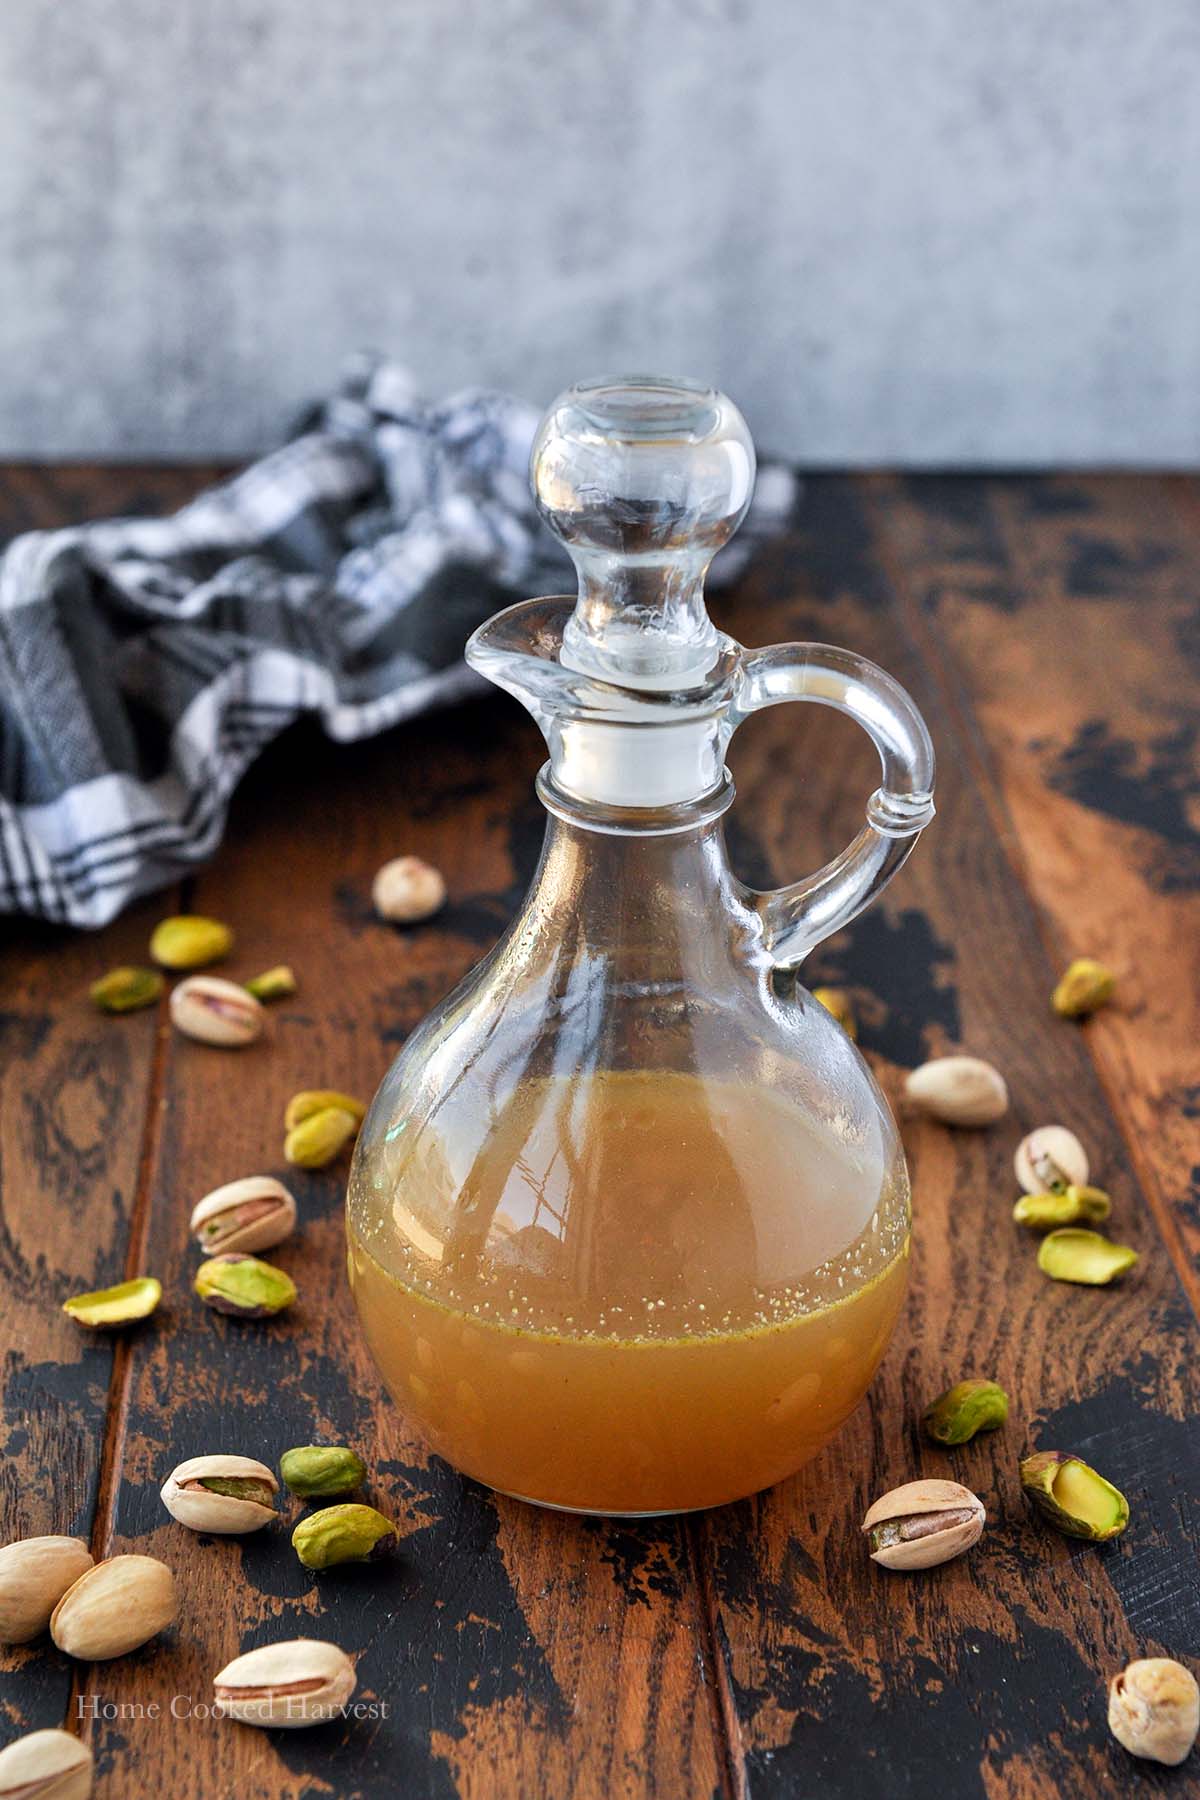 A glass jug filled with pistachio syrup, pistachios around, and a black and white towel.